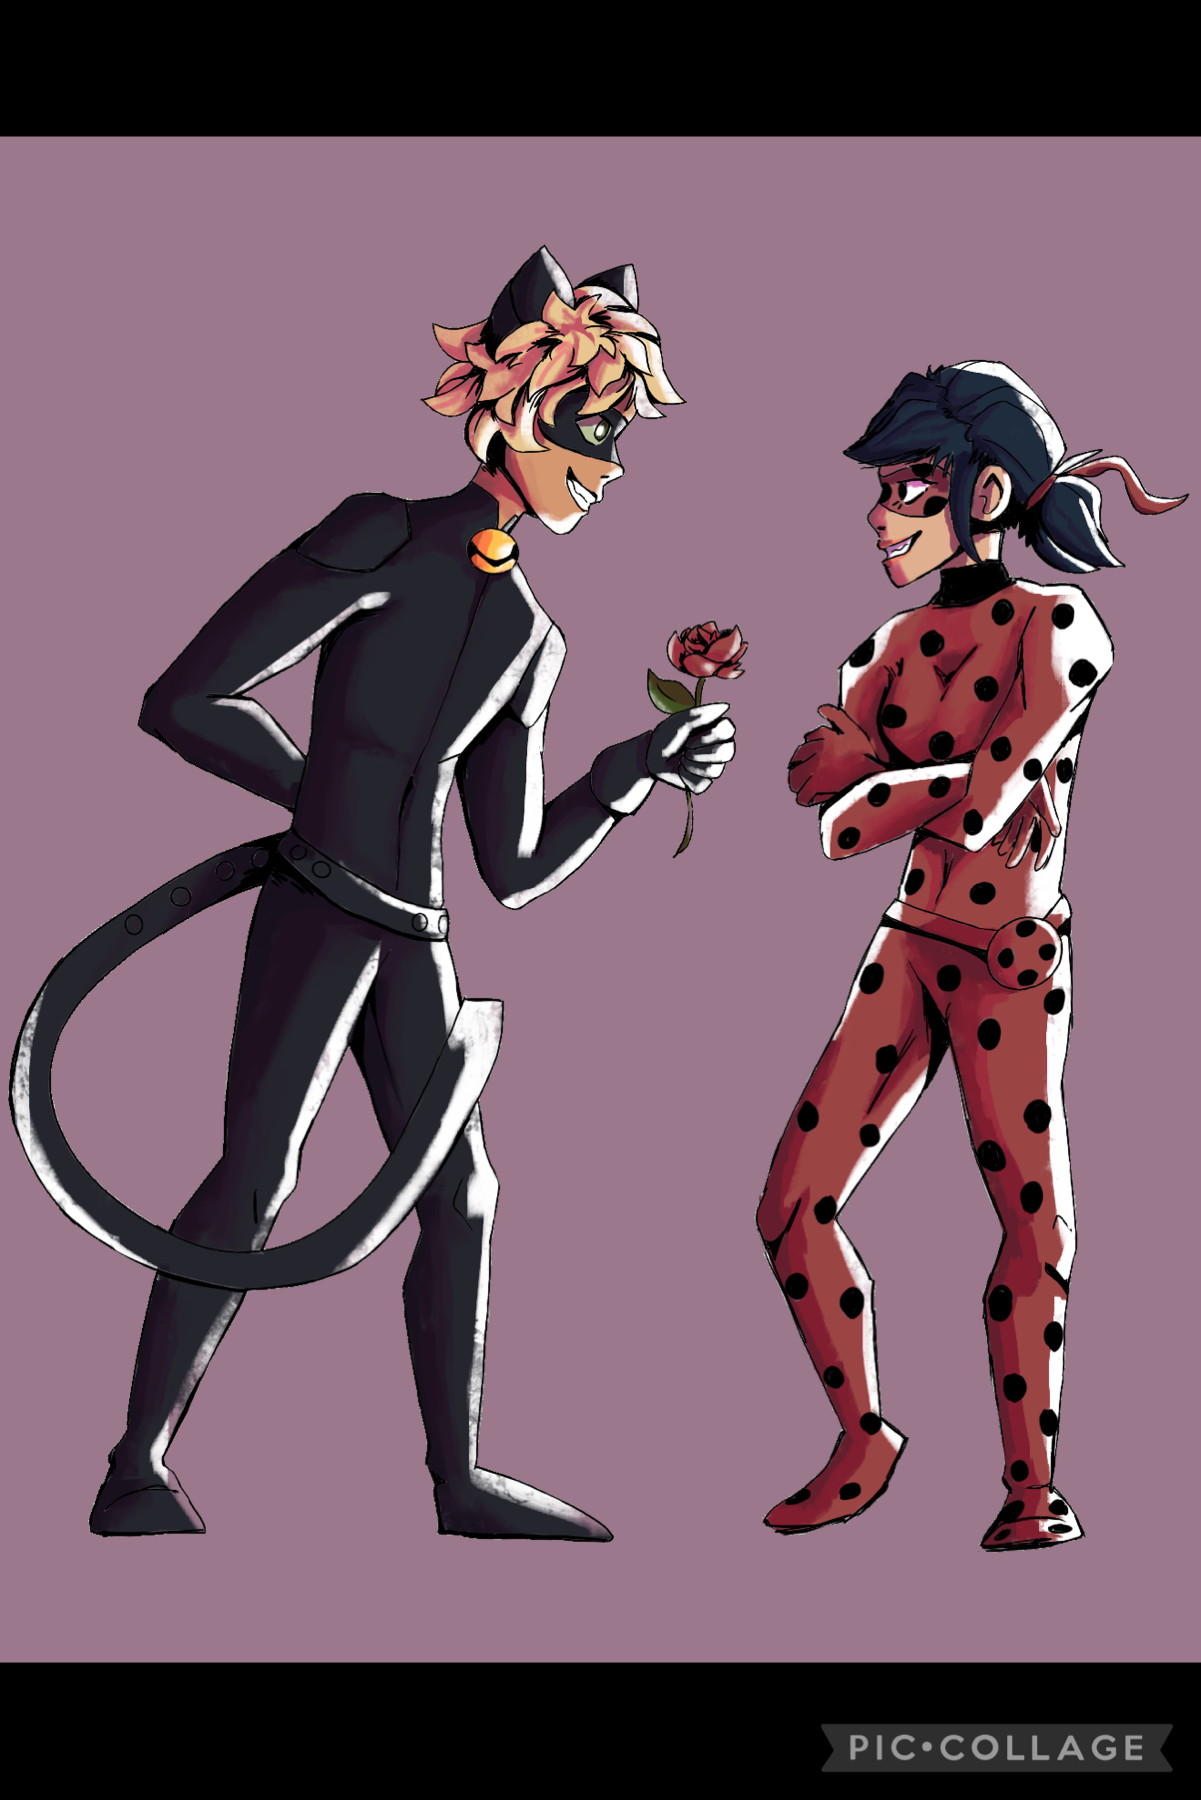 🐞 Tap 🐞 

May I introduce to you my latest obsession, I’ve literally gotten so invested in these two characters 